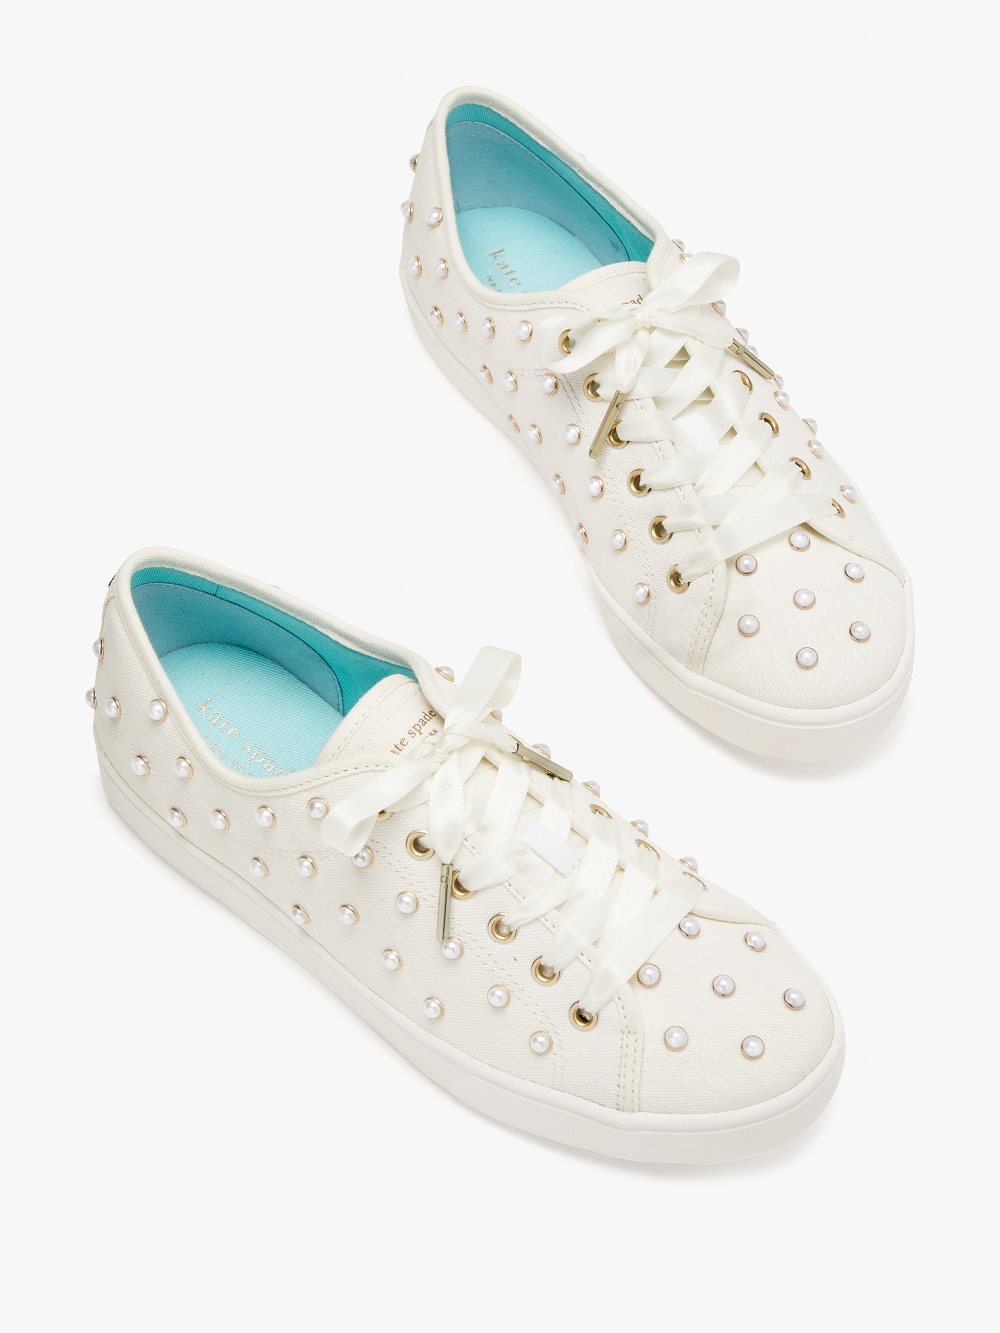 Women's parchment. match pearls sneakers | Kate Spade